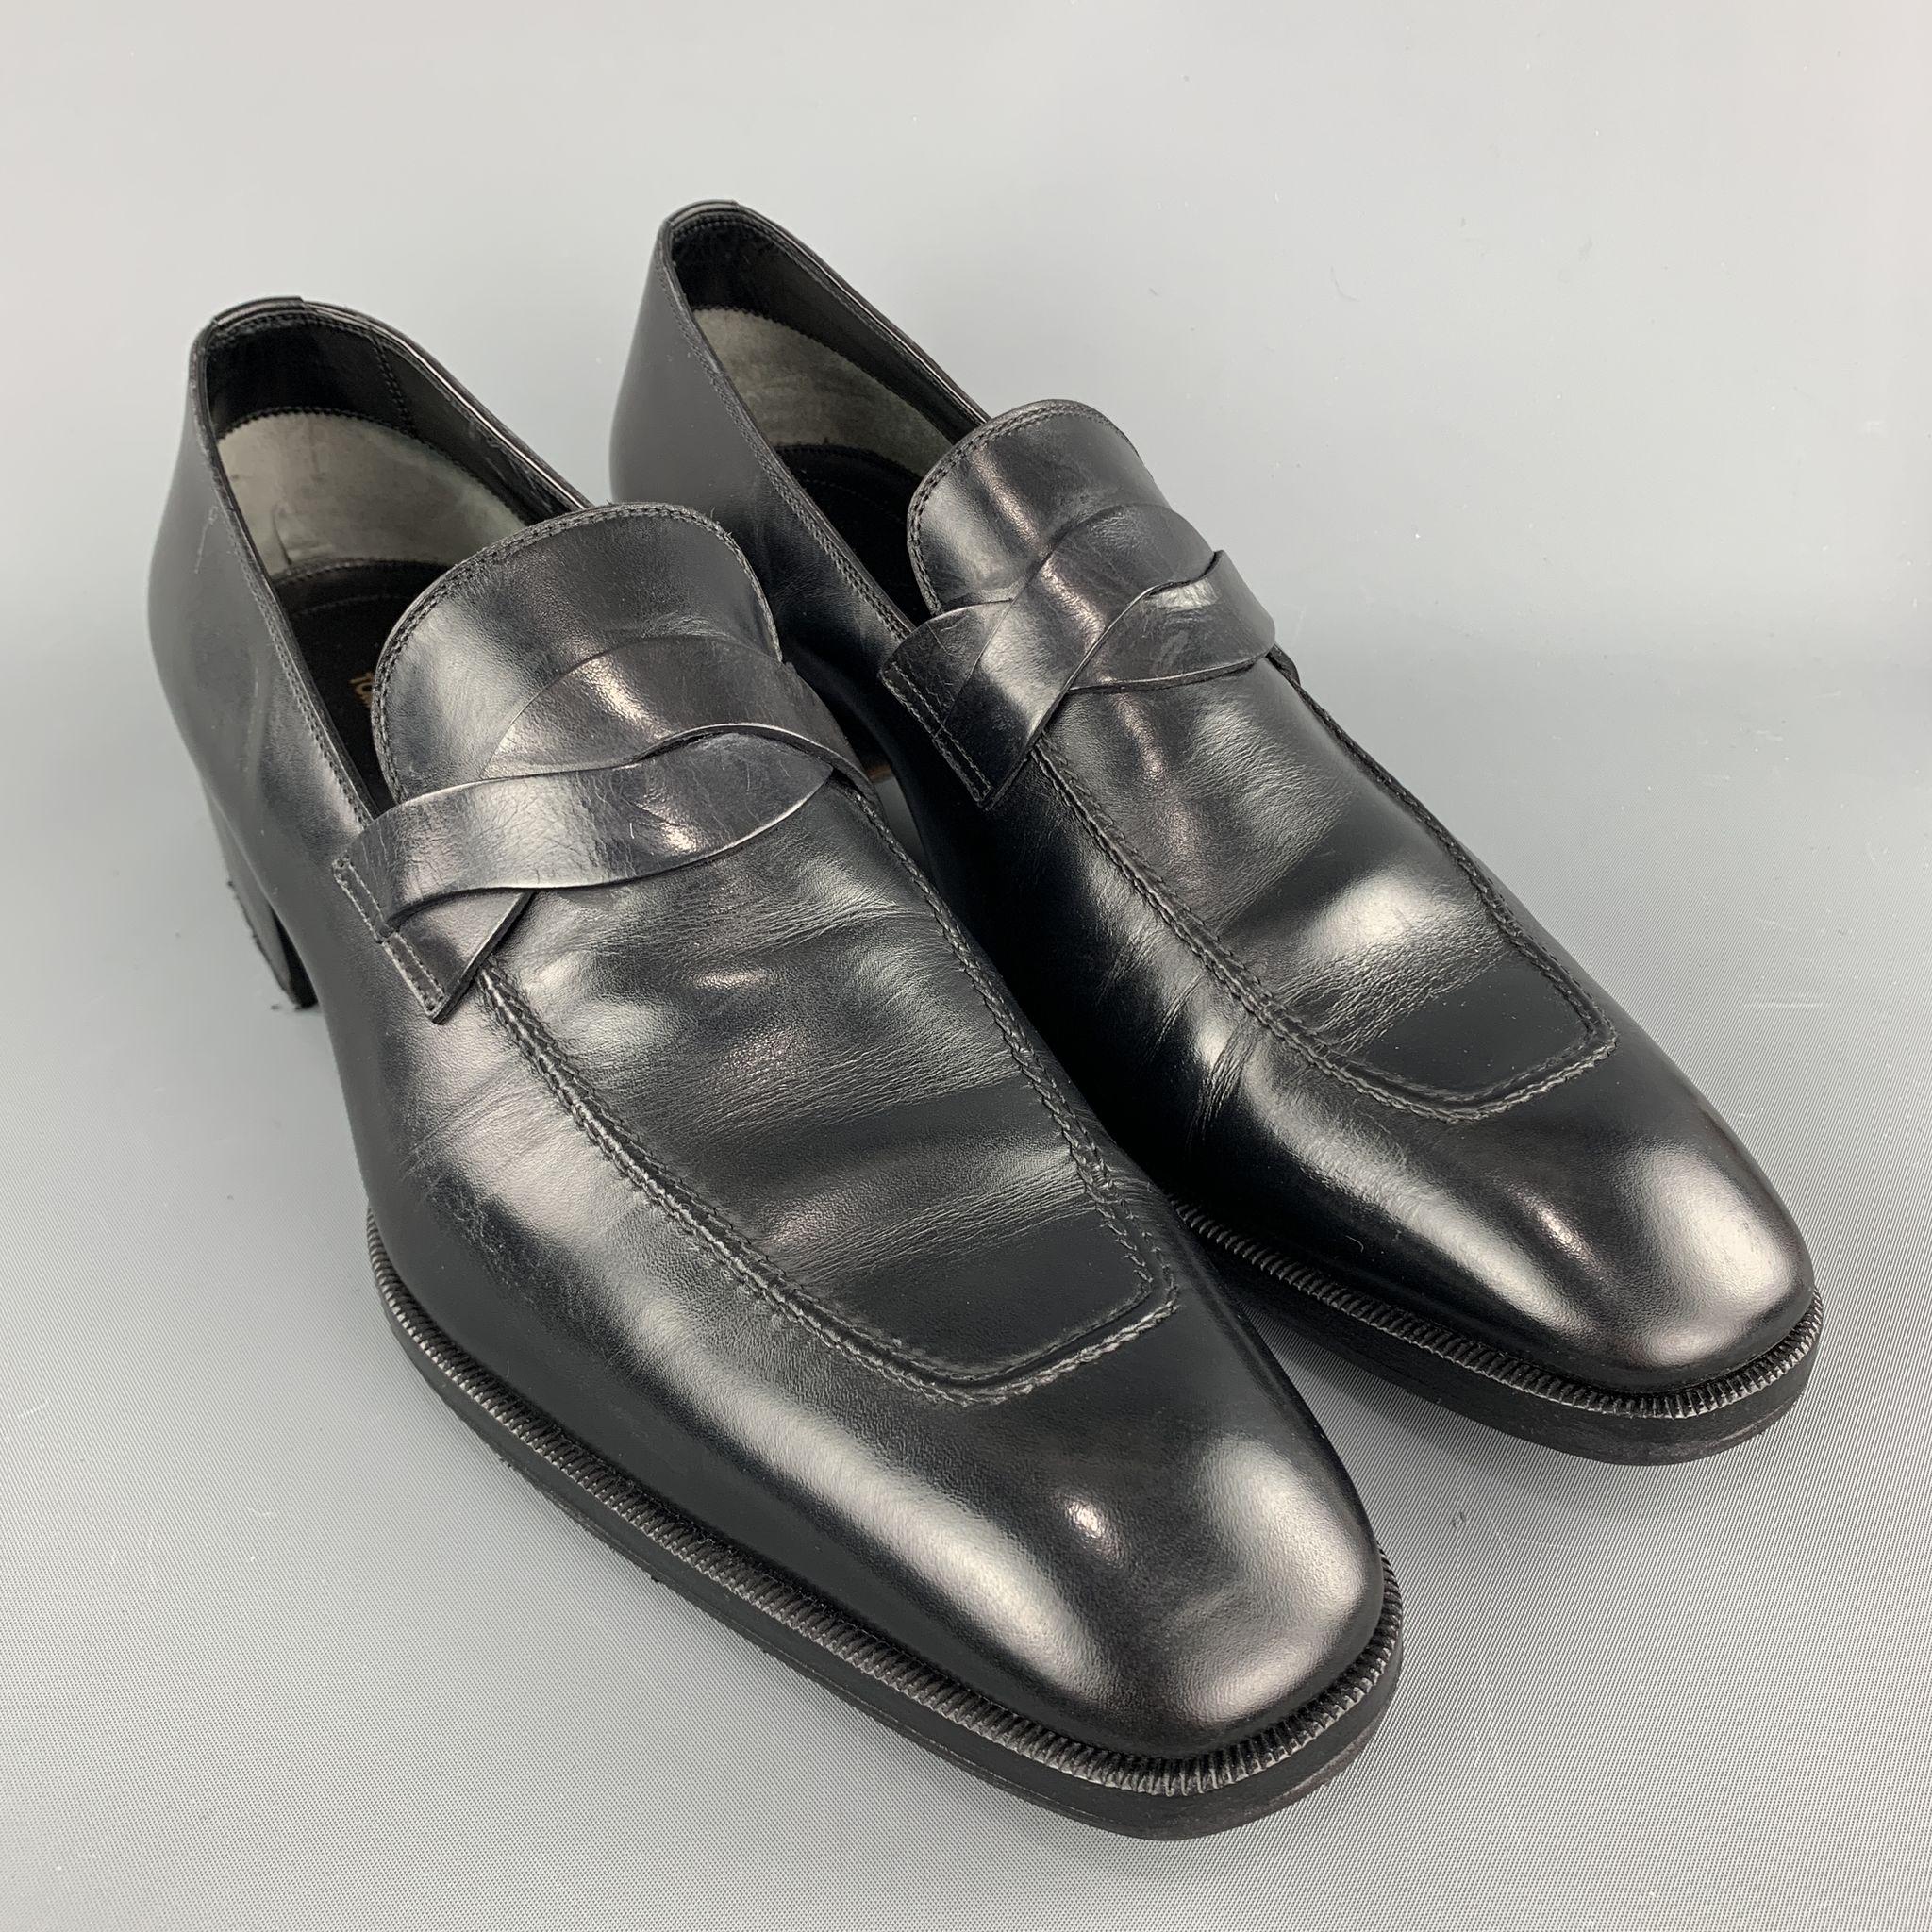 Retailed: $1850.00.  TOM FORD loafers comes in a black leather featuring a slip on style, elkan twisted band detail, and a wooden heel. Made in Italy.

Excellent Pre-Owned Condition.
Marked: 12.5 TT

Measurements:

Length: 13 in.
Width: 4 in. 
Heel: